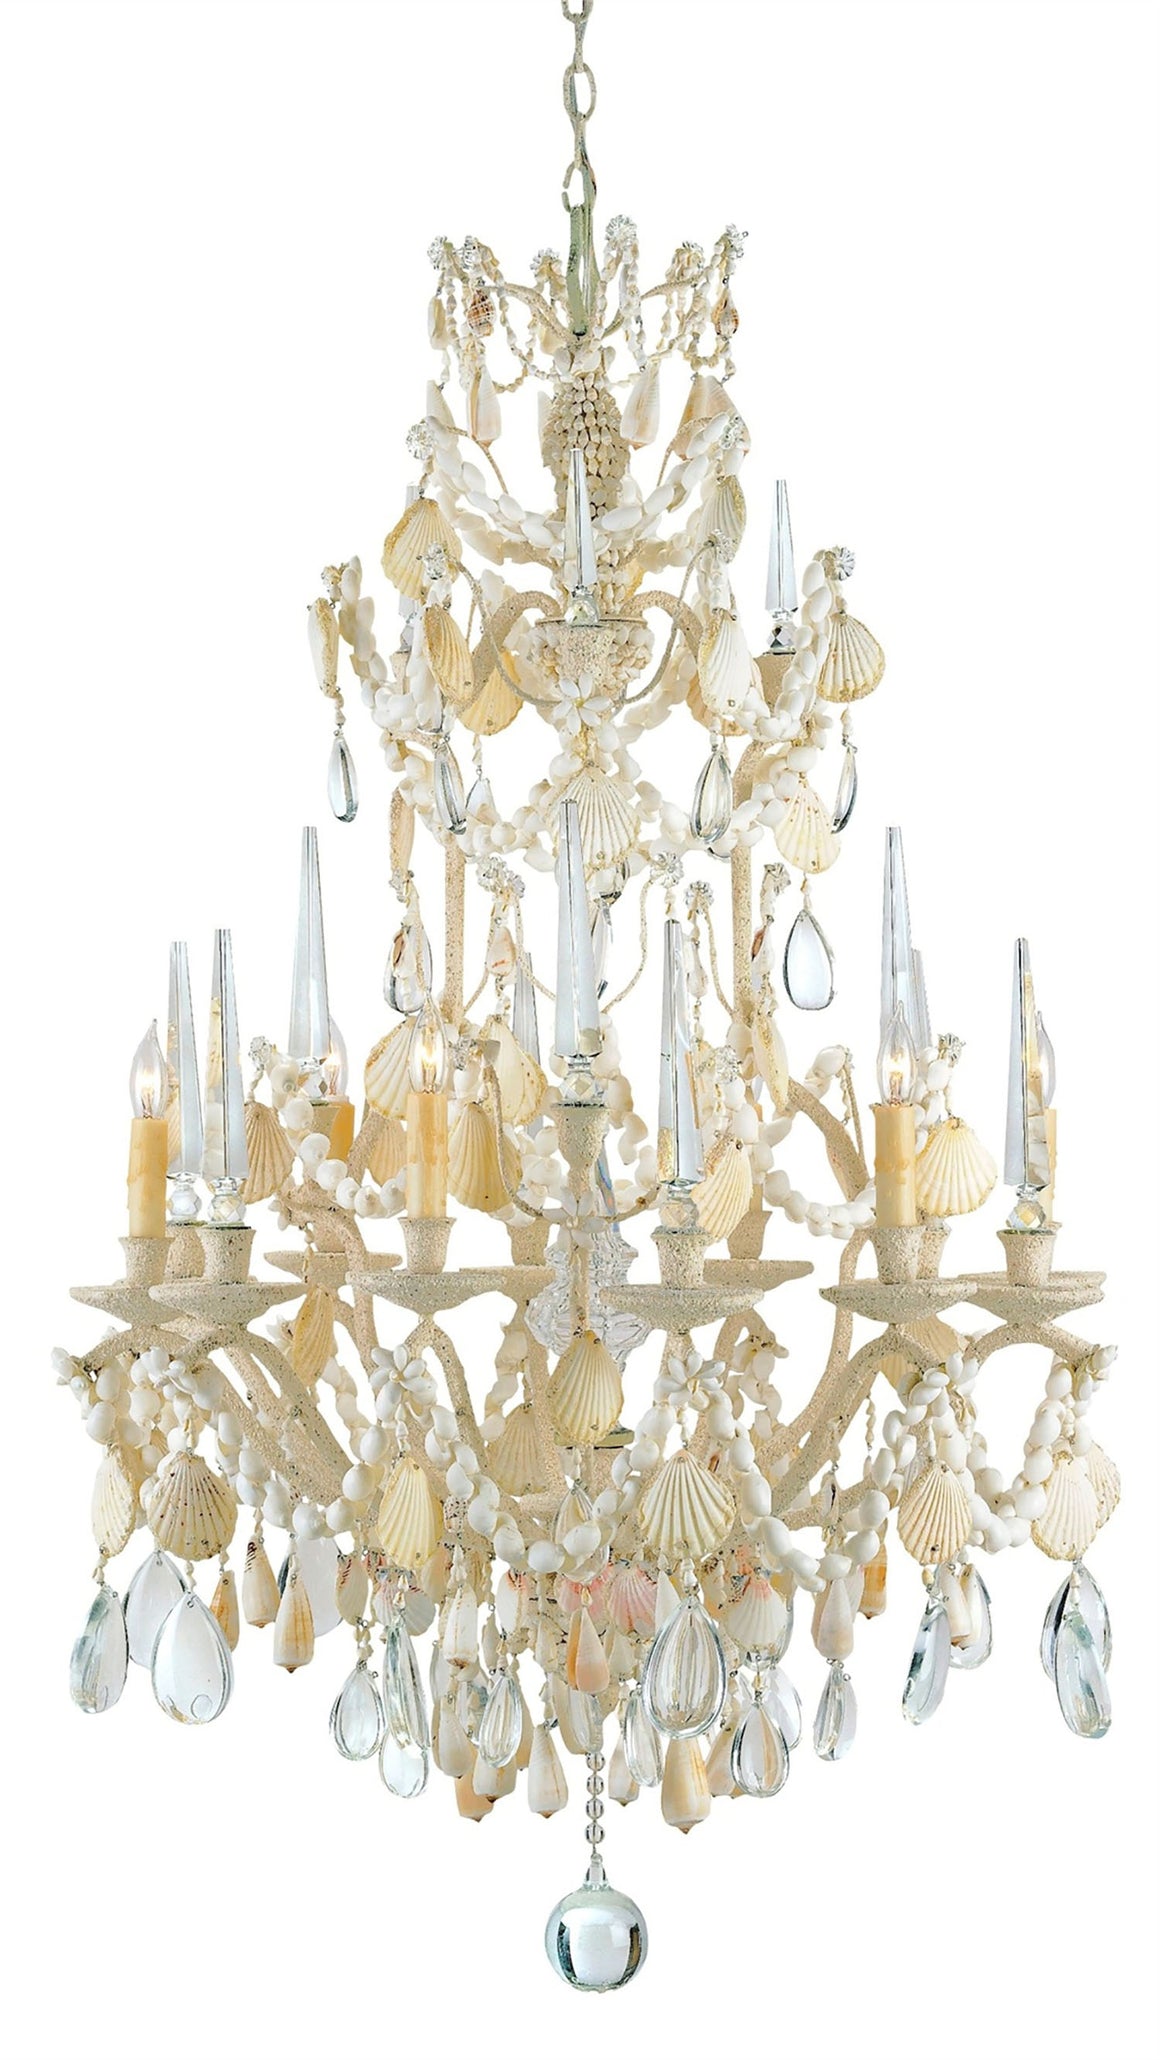 Currey and Company Buttermere Chandelier